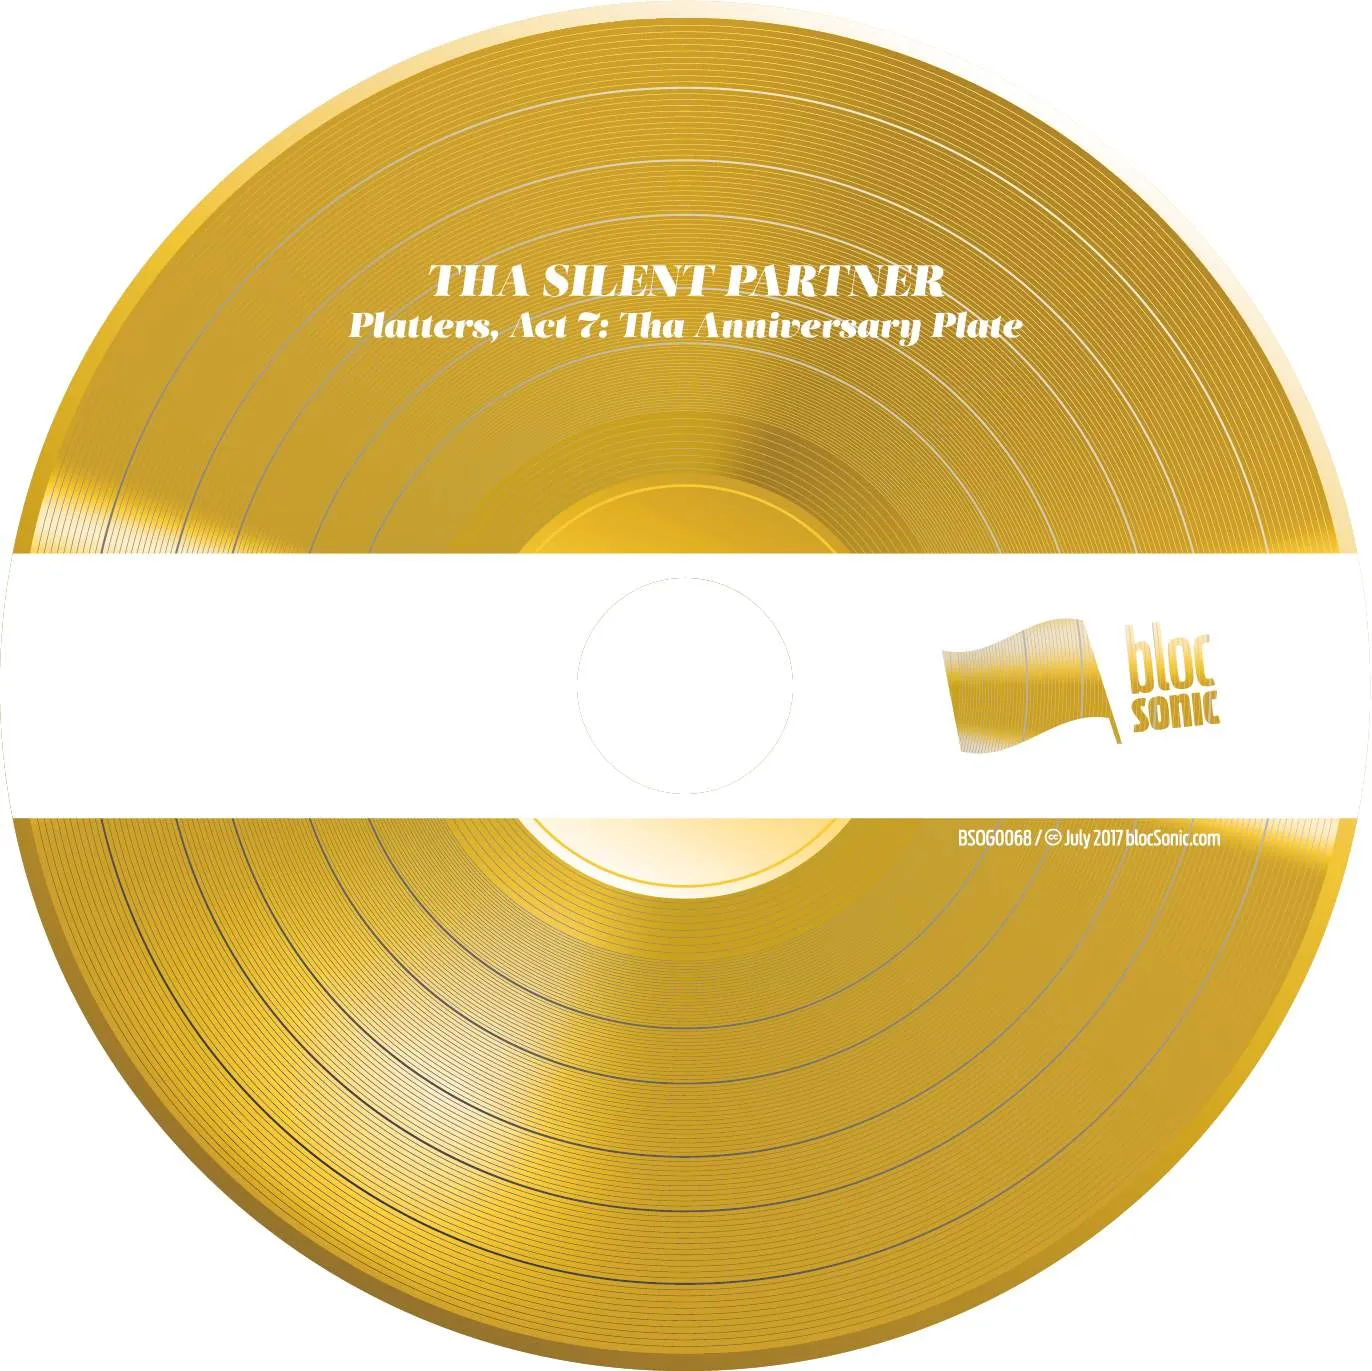 Album disc for “Platters, Act 7: Tha Anniversary Plate” by Tha Silent Partner